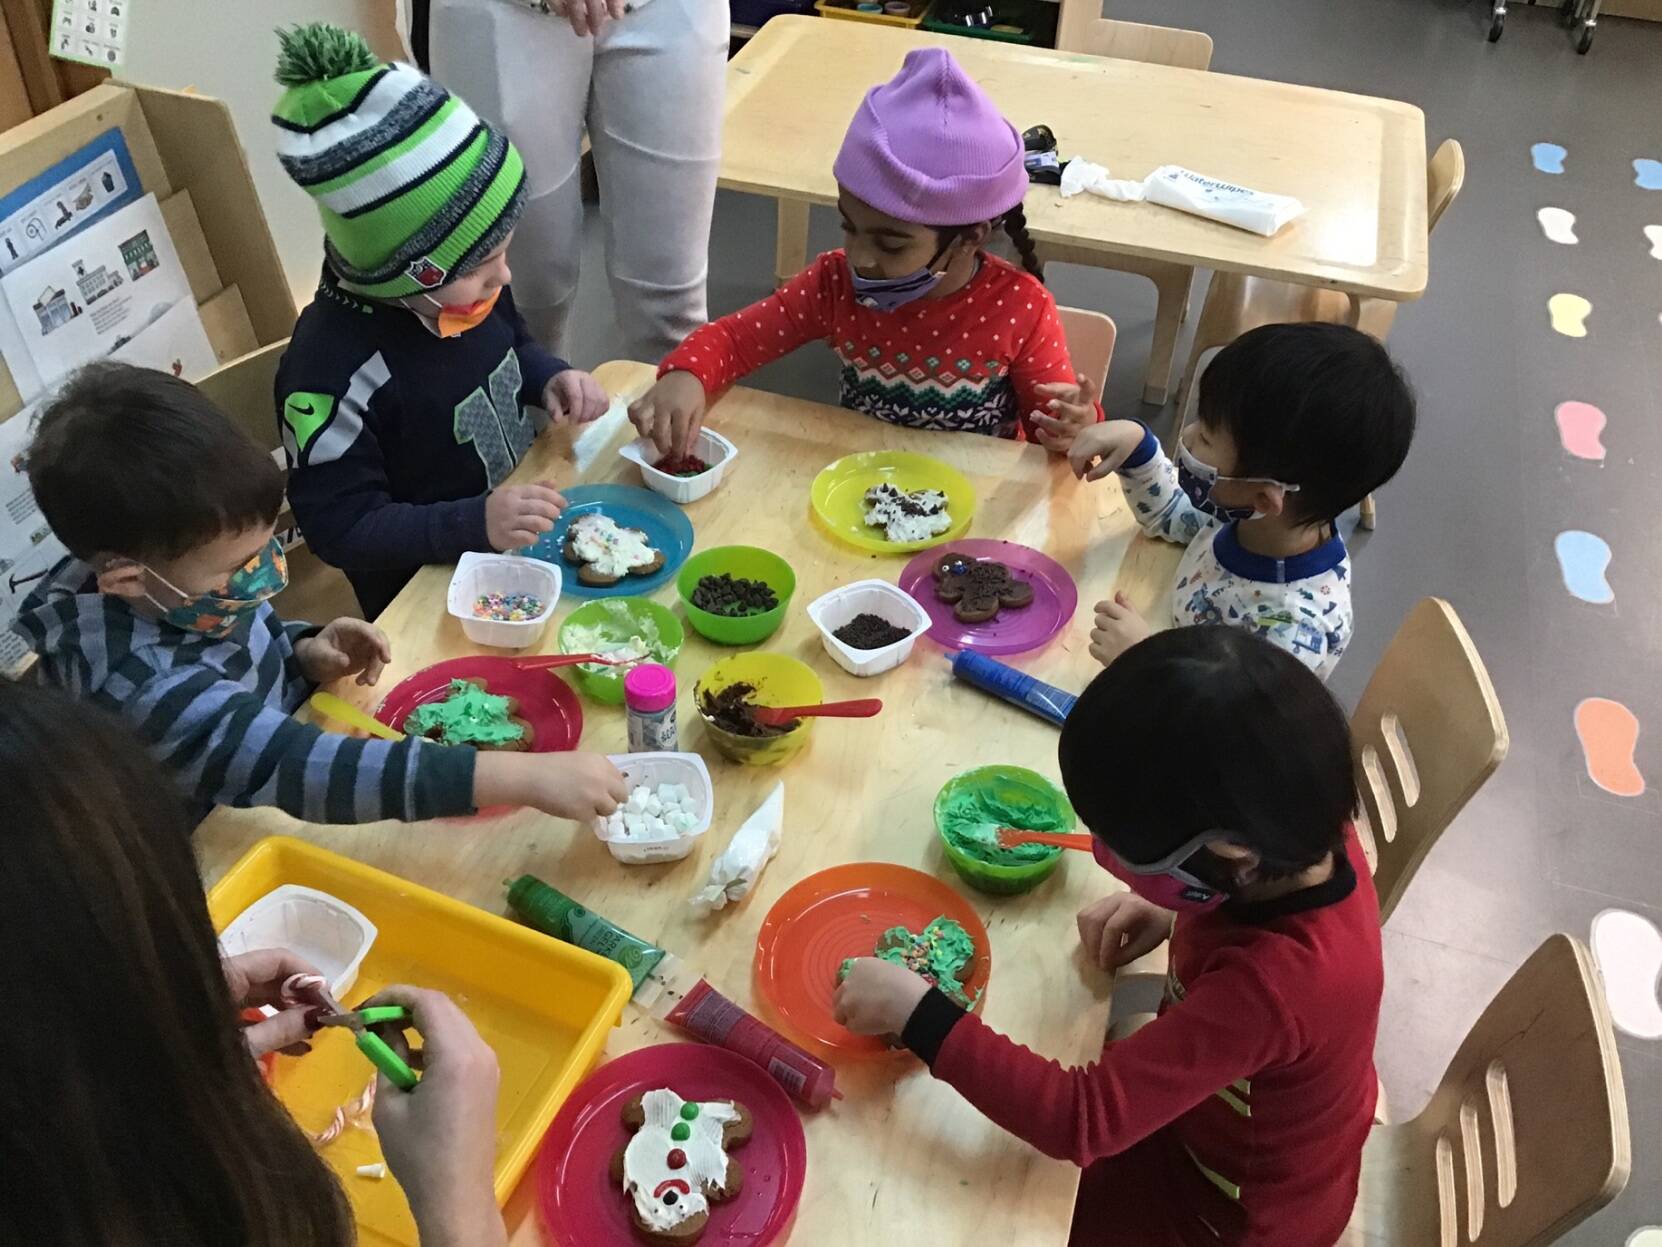 Mercer Island School District Early Education Program students engage in a classroom activity. Courtesy of the Mercer Island School District